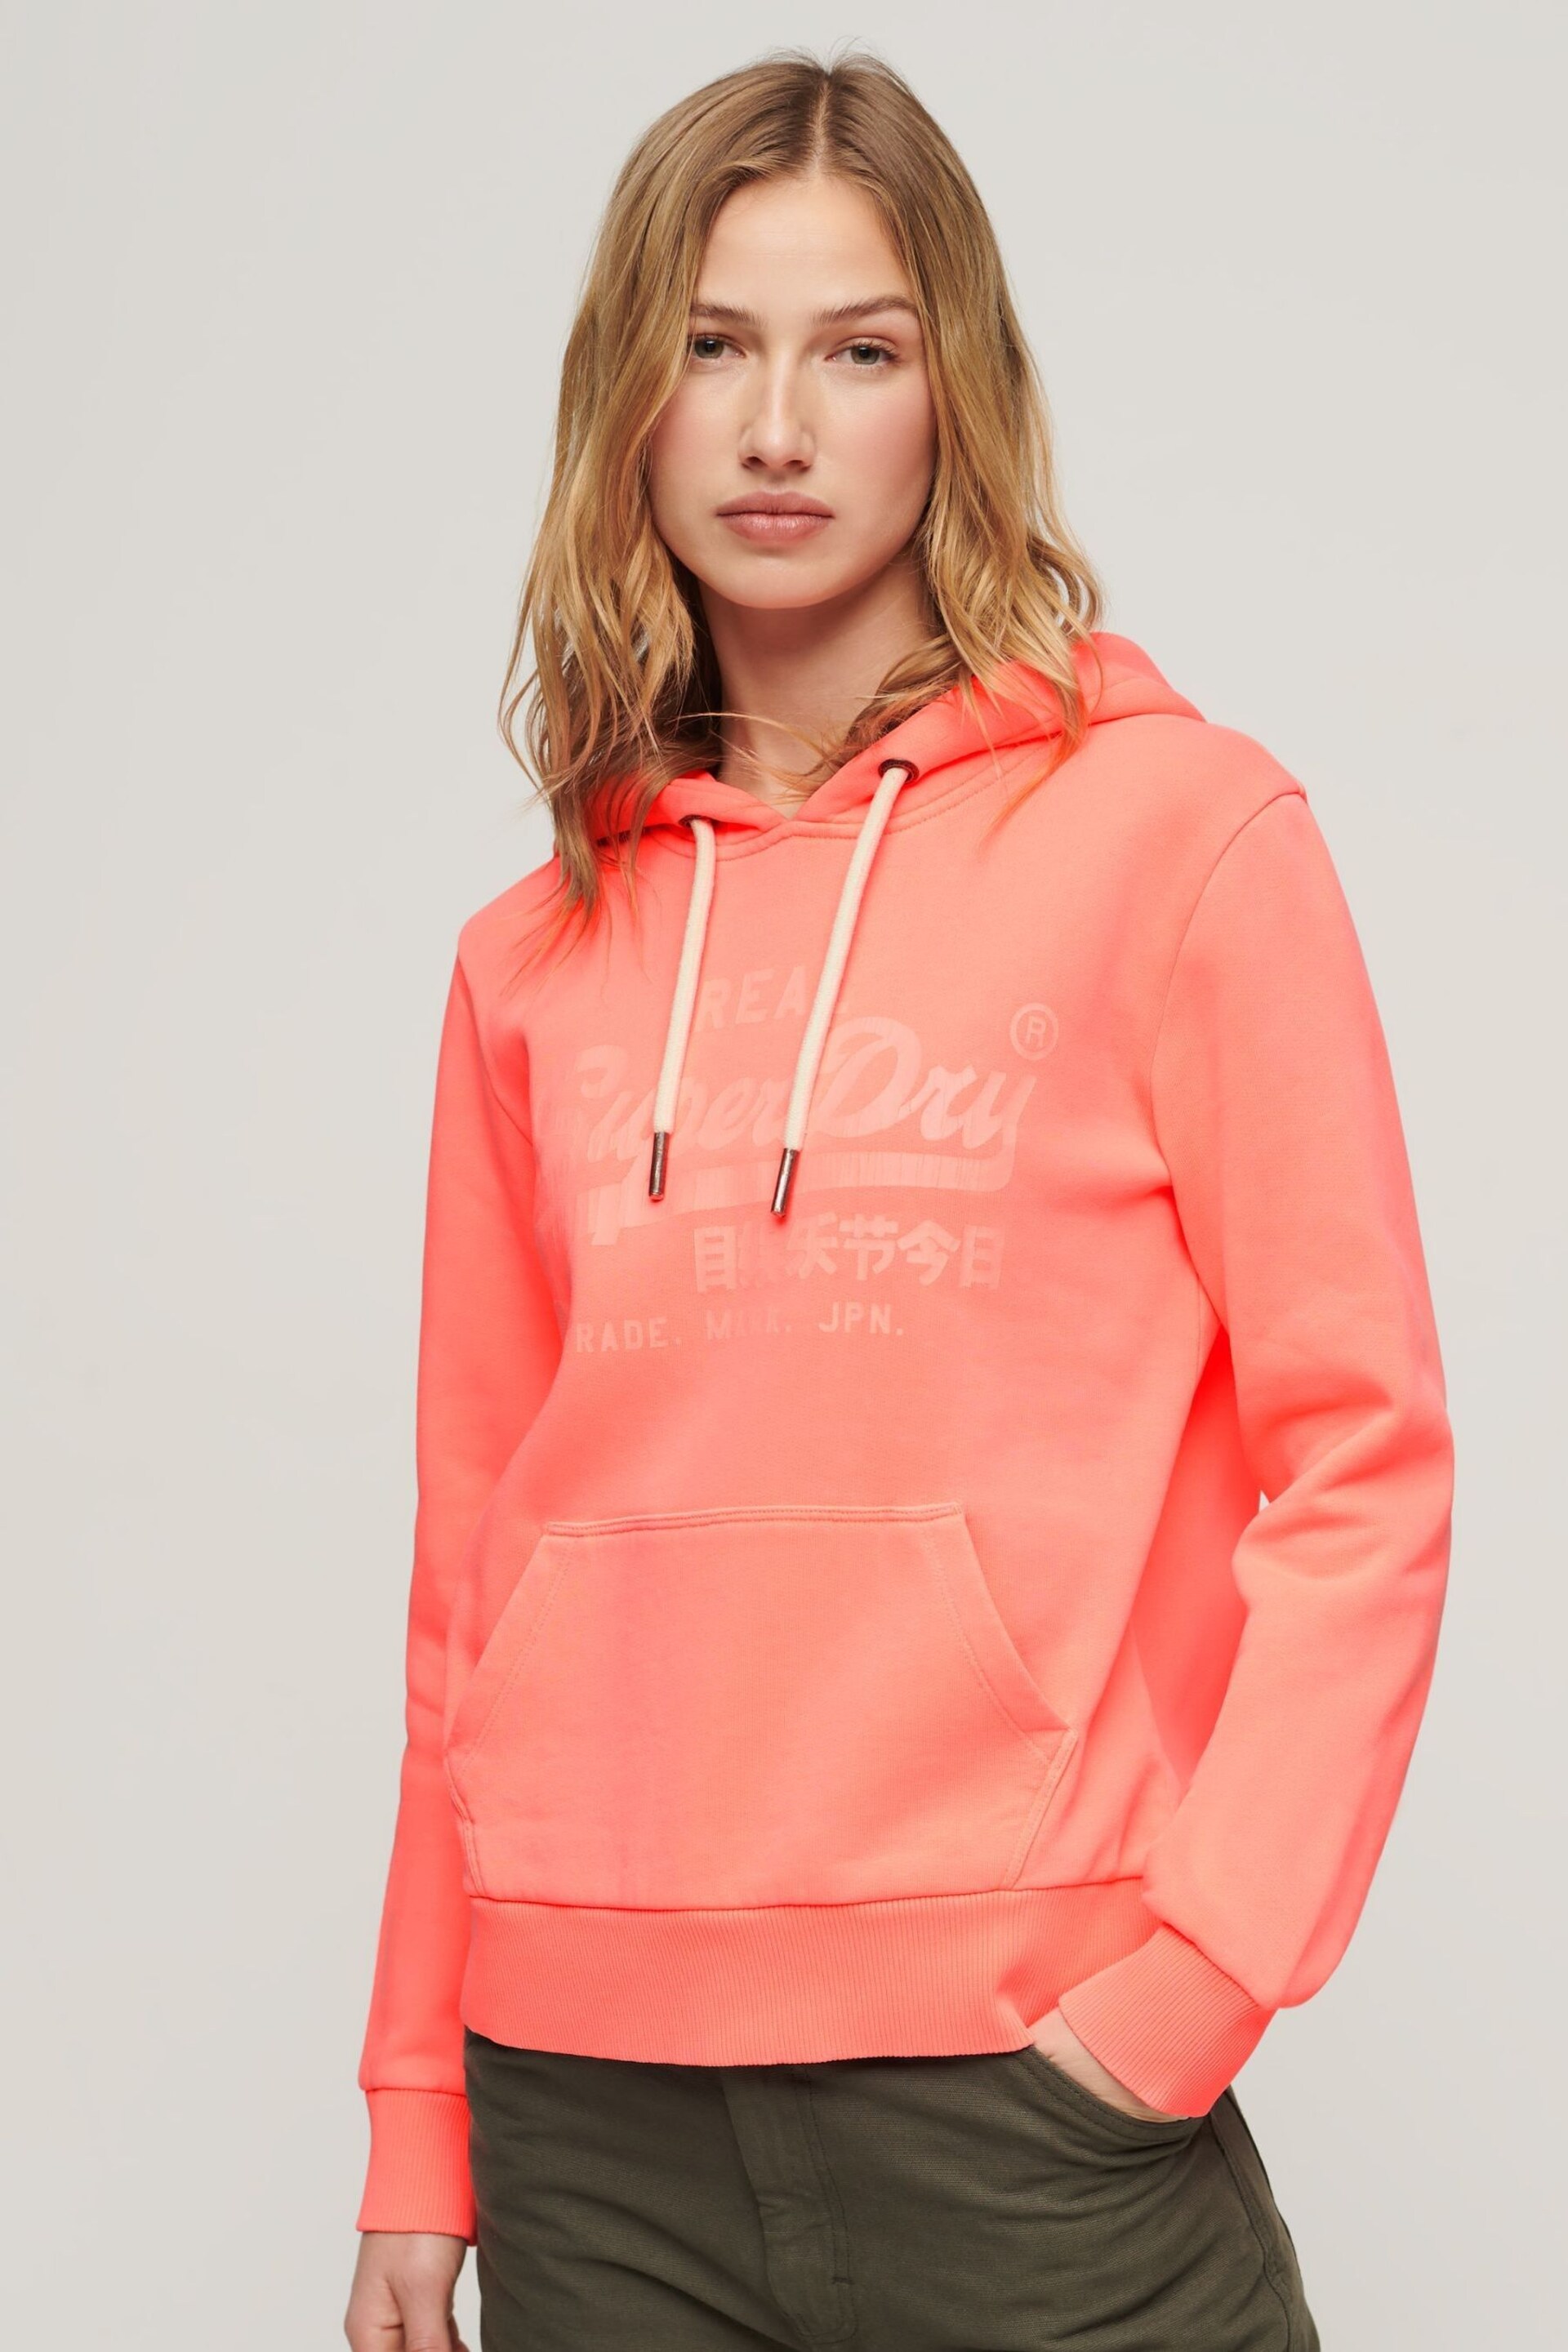 Superdry Pink Neon Graphic Hoodie - Image 1 of 3